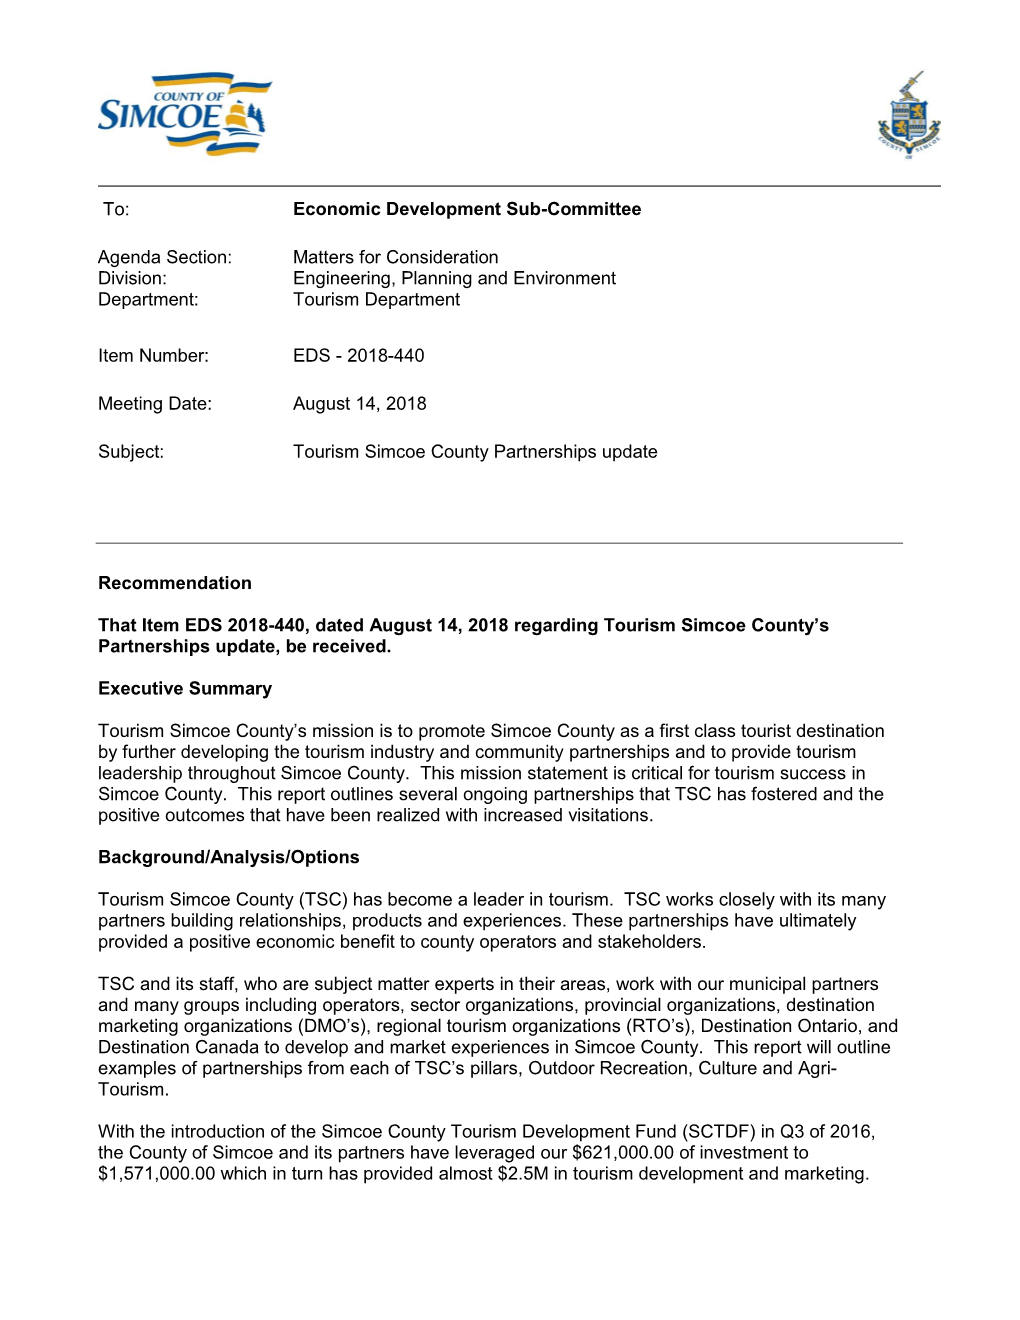 EDS 2018-440, Dated August 14, 2018 Regarding Tourism Simcoe County’S Partnerships Update, Be Received